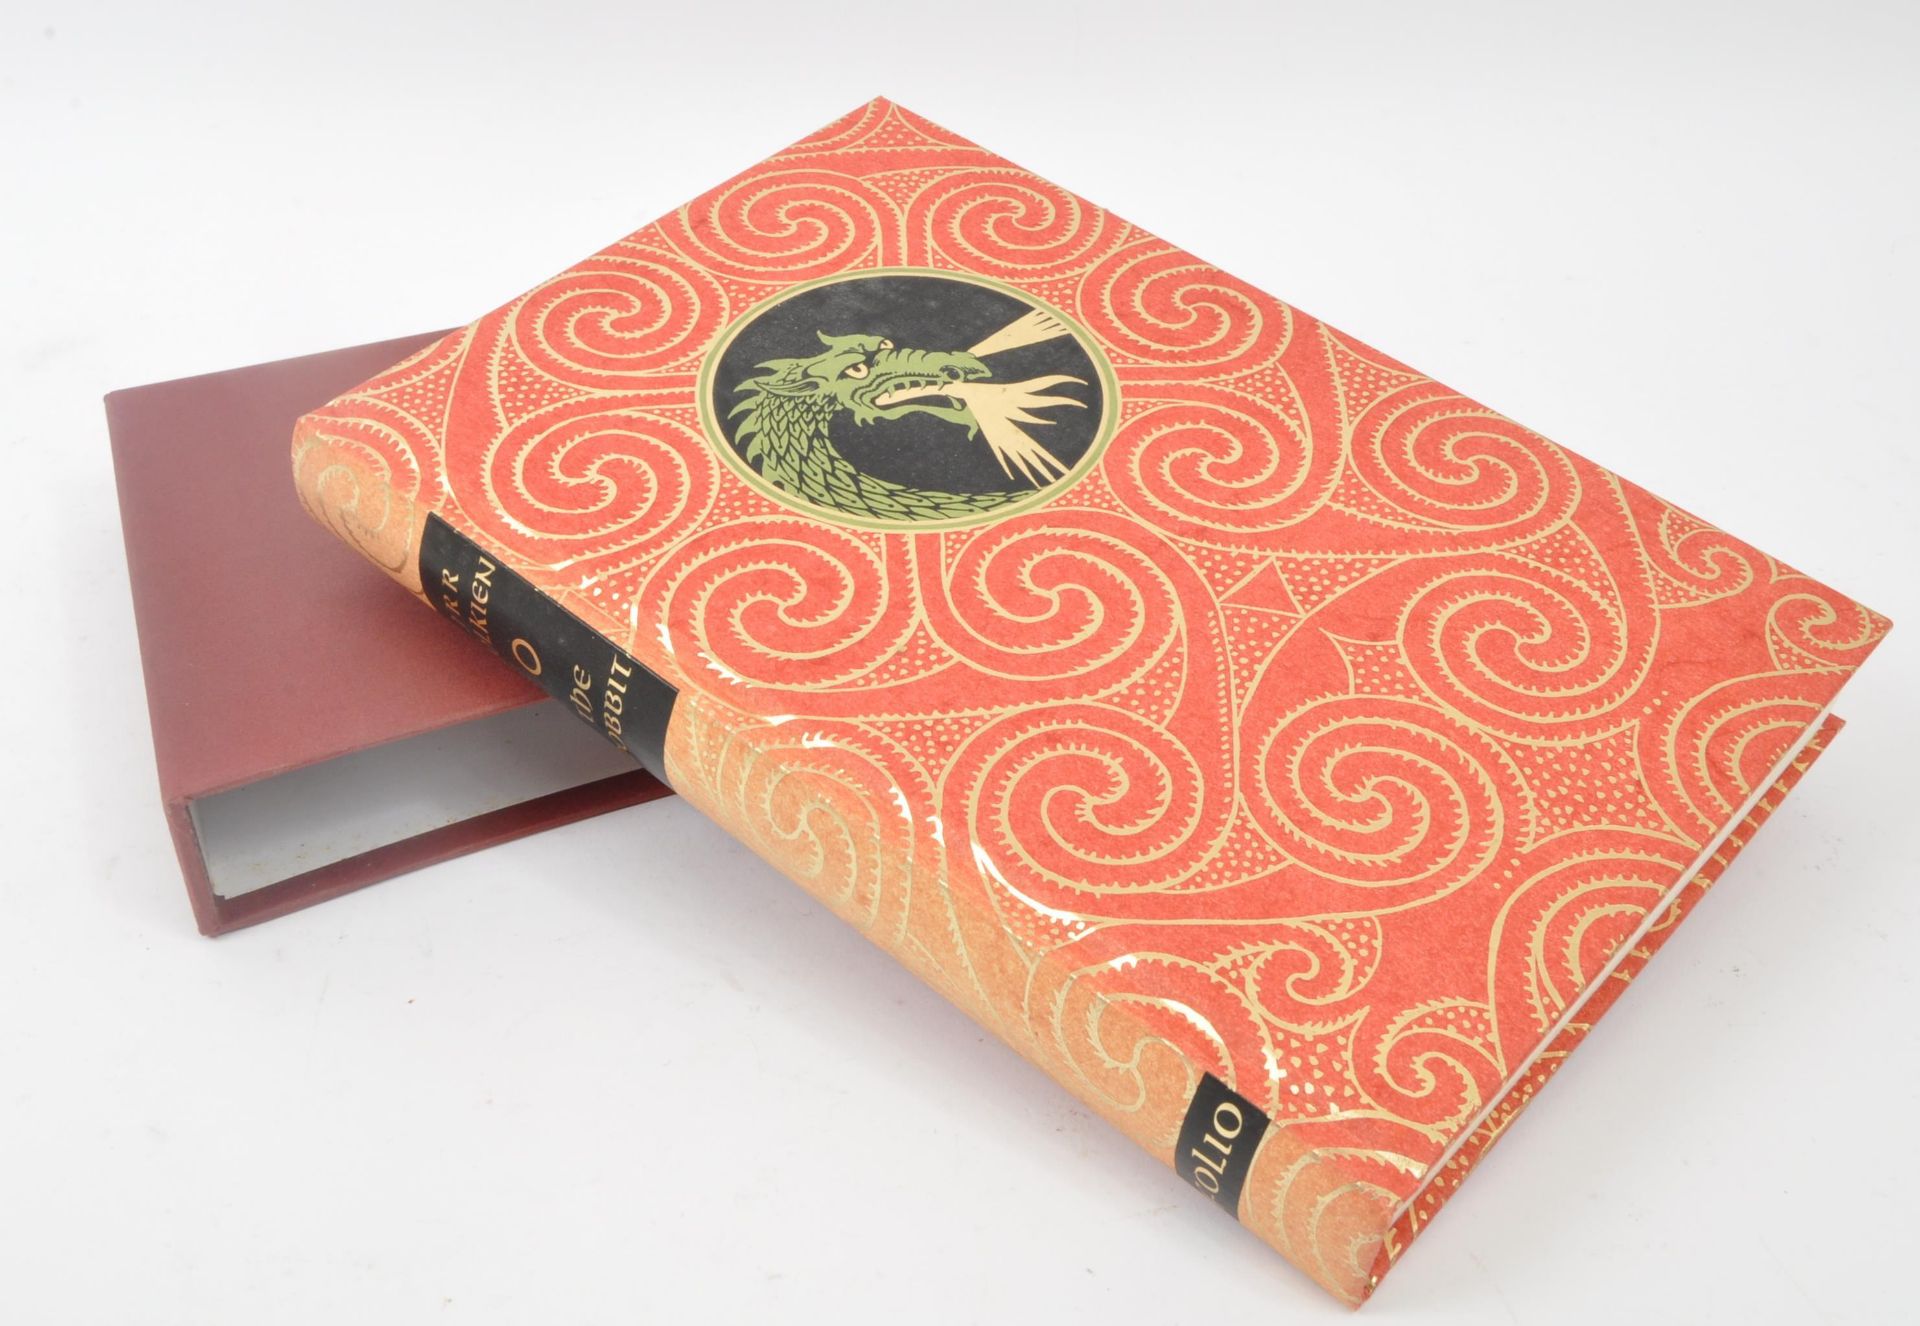 FOUR TOLKIEN LORD OF THE RINGS BOOKS - FOLIO SOCIETY - Image 5 of 5